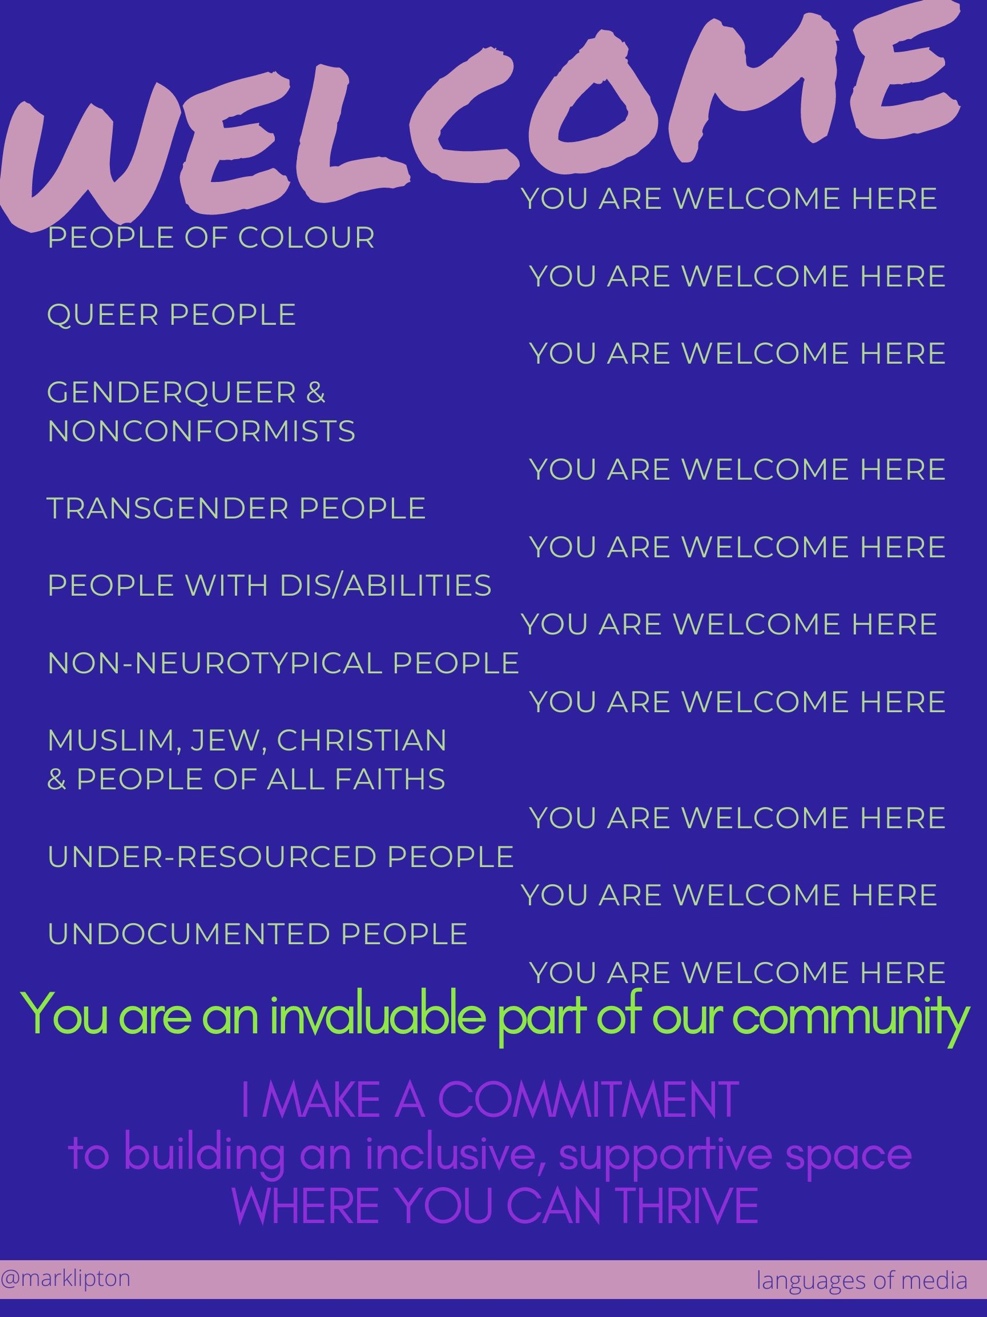 WELCOME! you are welcome here people of colour, you are welcome here Queer people, you are welcome here genderqueer & nonconformists, you are welcome here transgender people, you are welcome here people with dis/abilities, you are welcome here non-neurotypical people, you are welcome here Muslim, Jew, Christian & people of all faiths, you are welcome here under-resourced people, you are welcome here Undocumented, people you are welcome here. I make a commitment to building an inclusive, supportive space where you can thrive.